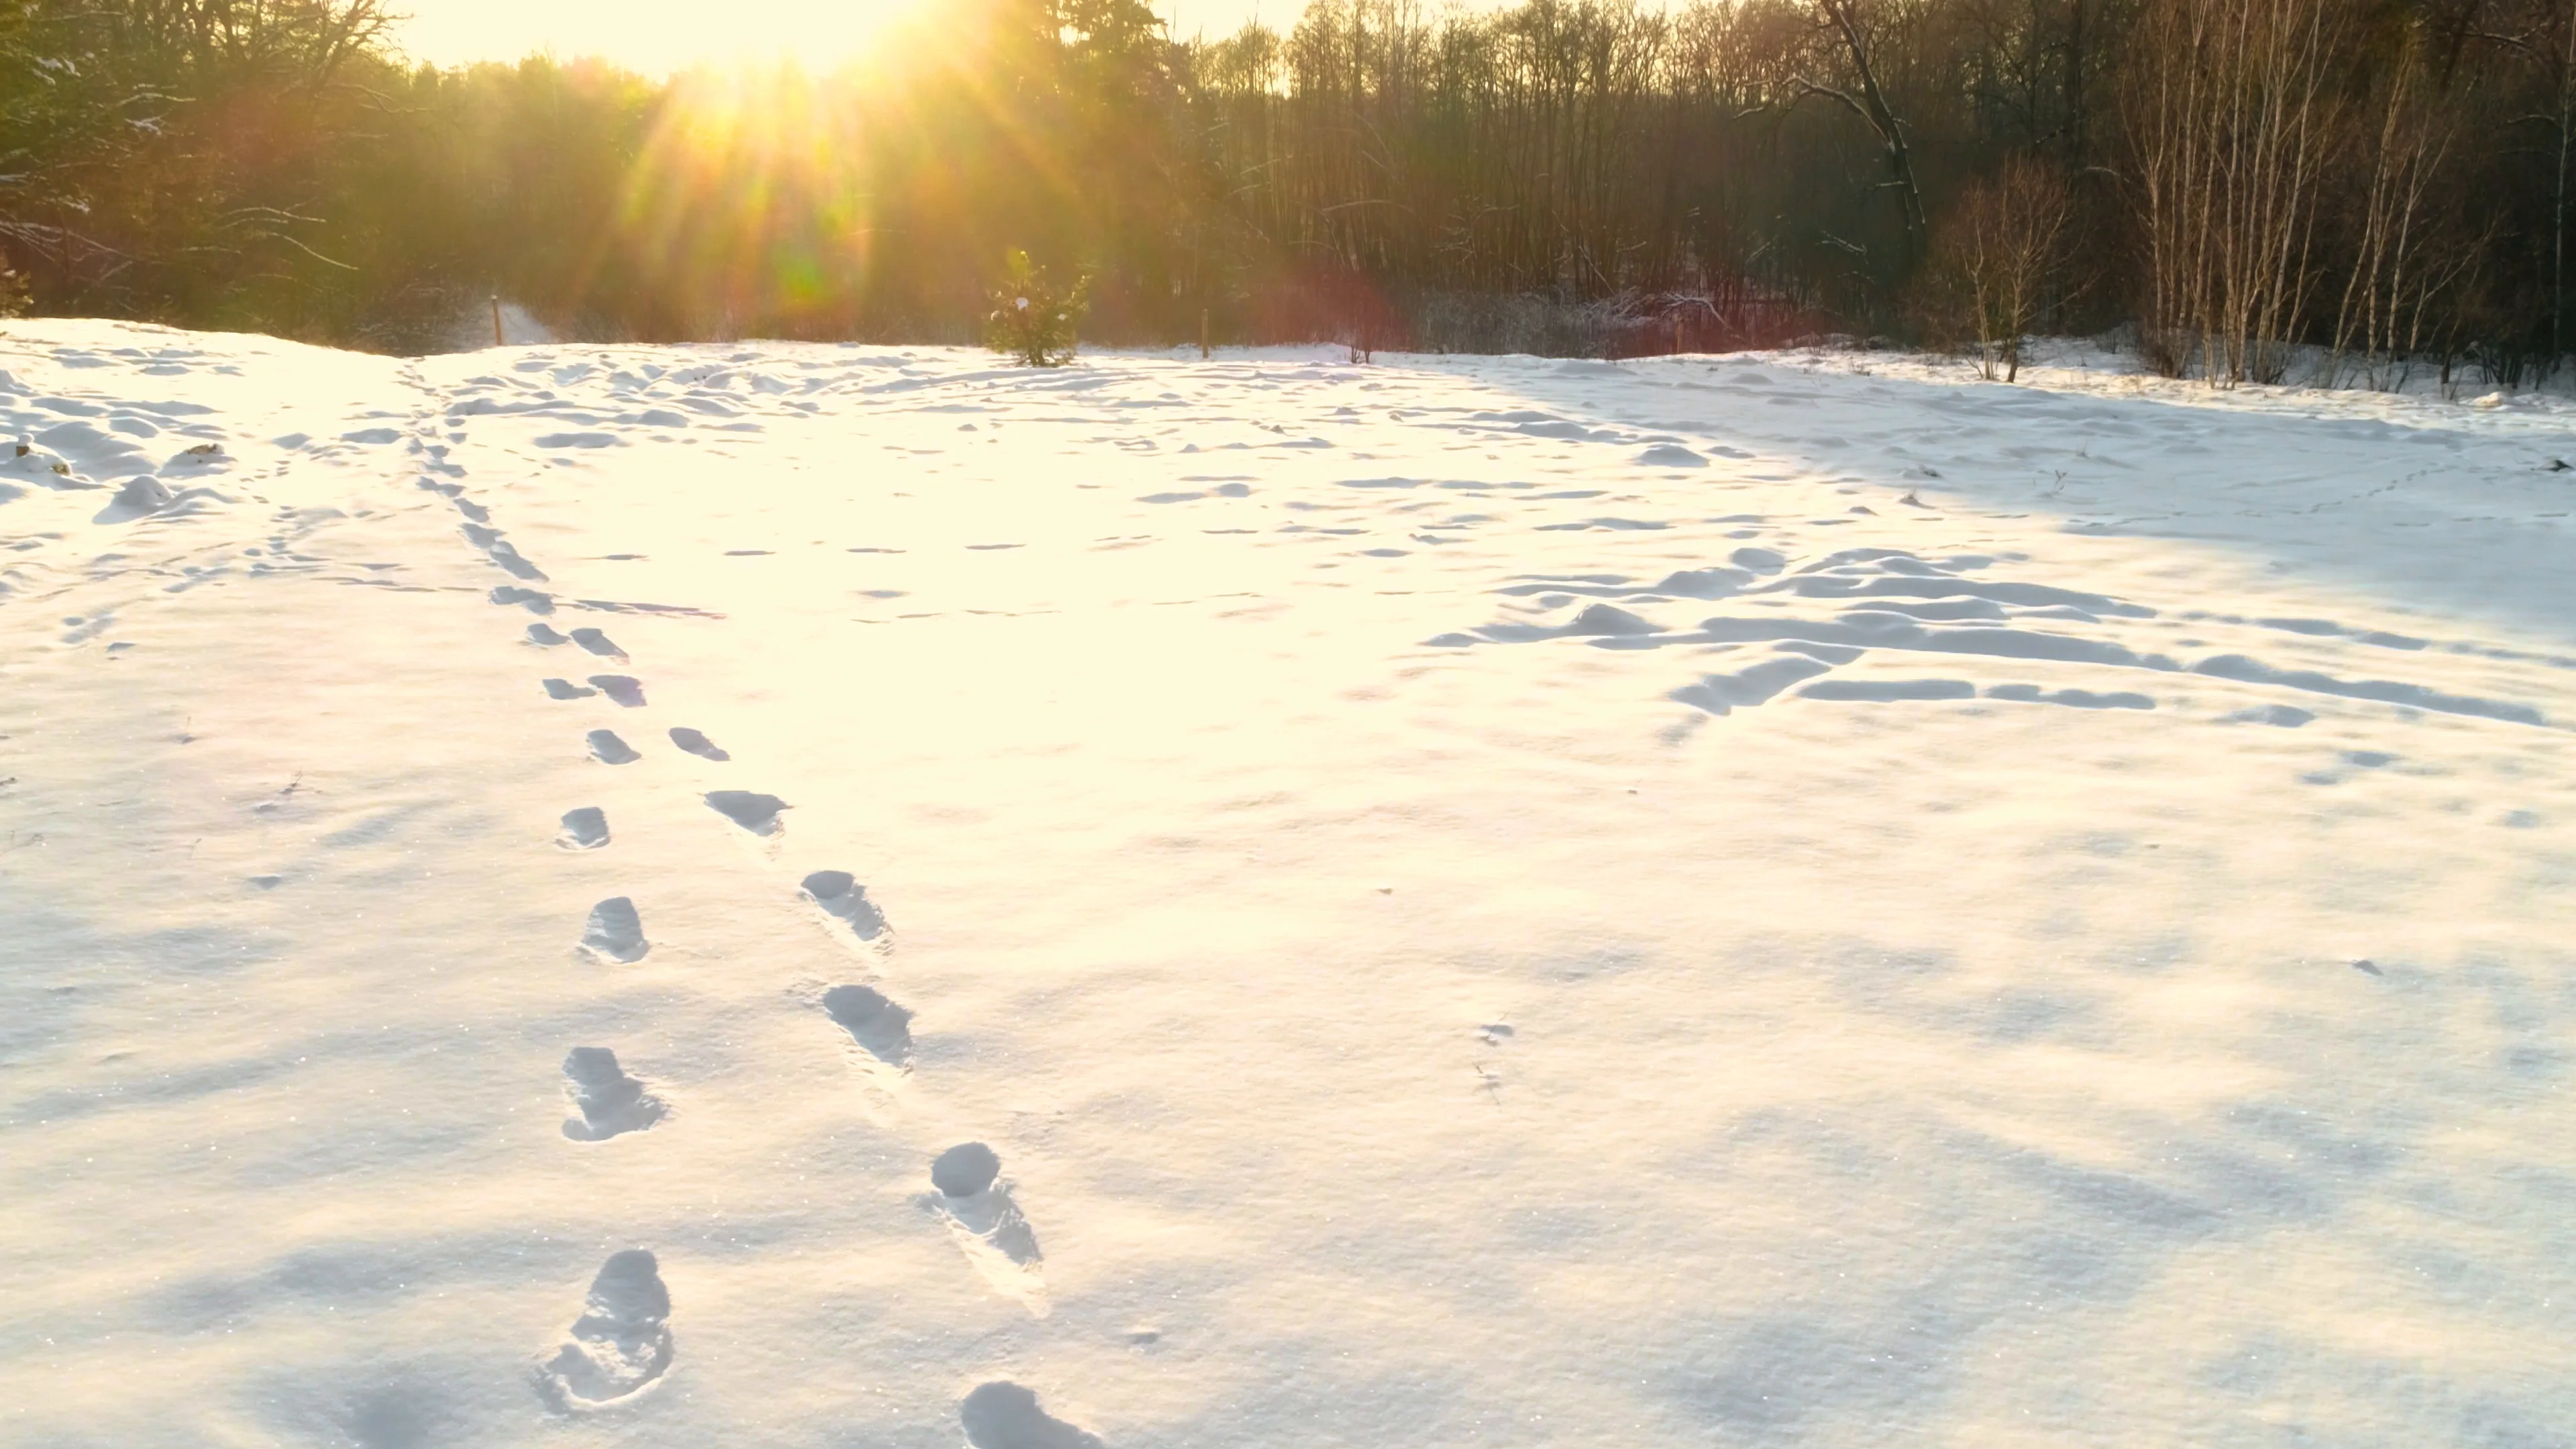 Footprints in the snow in the forest at sunset